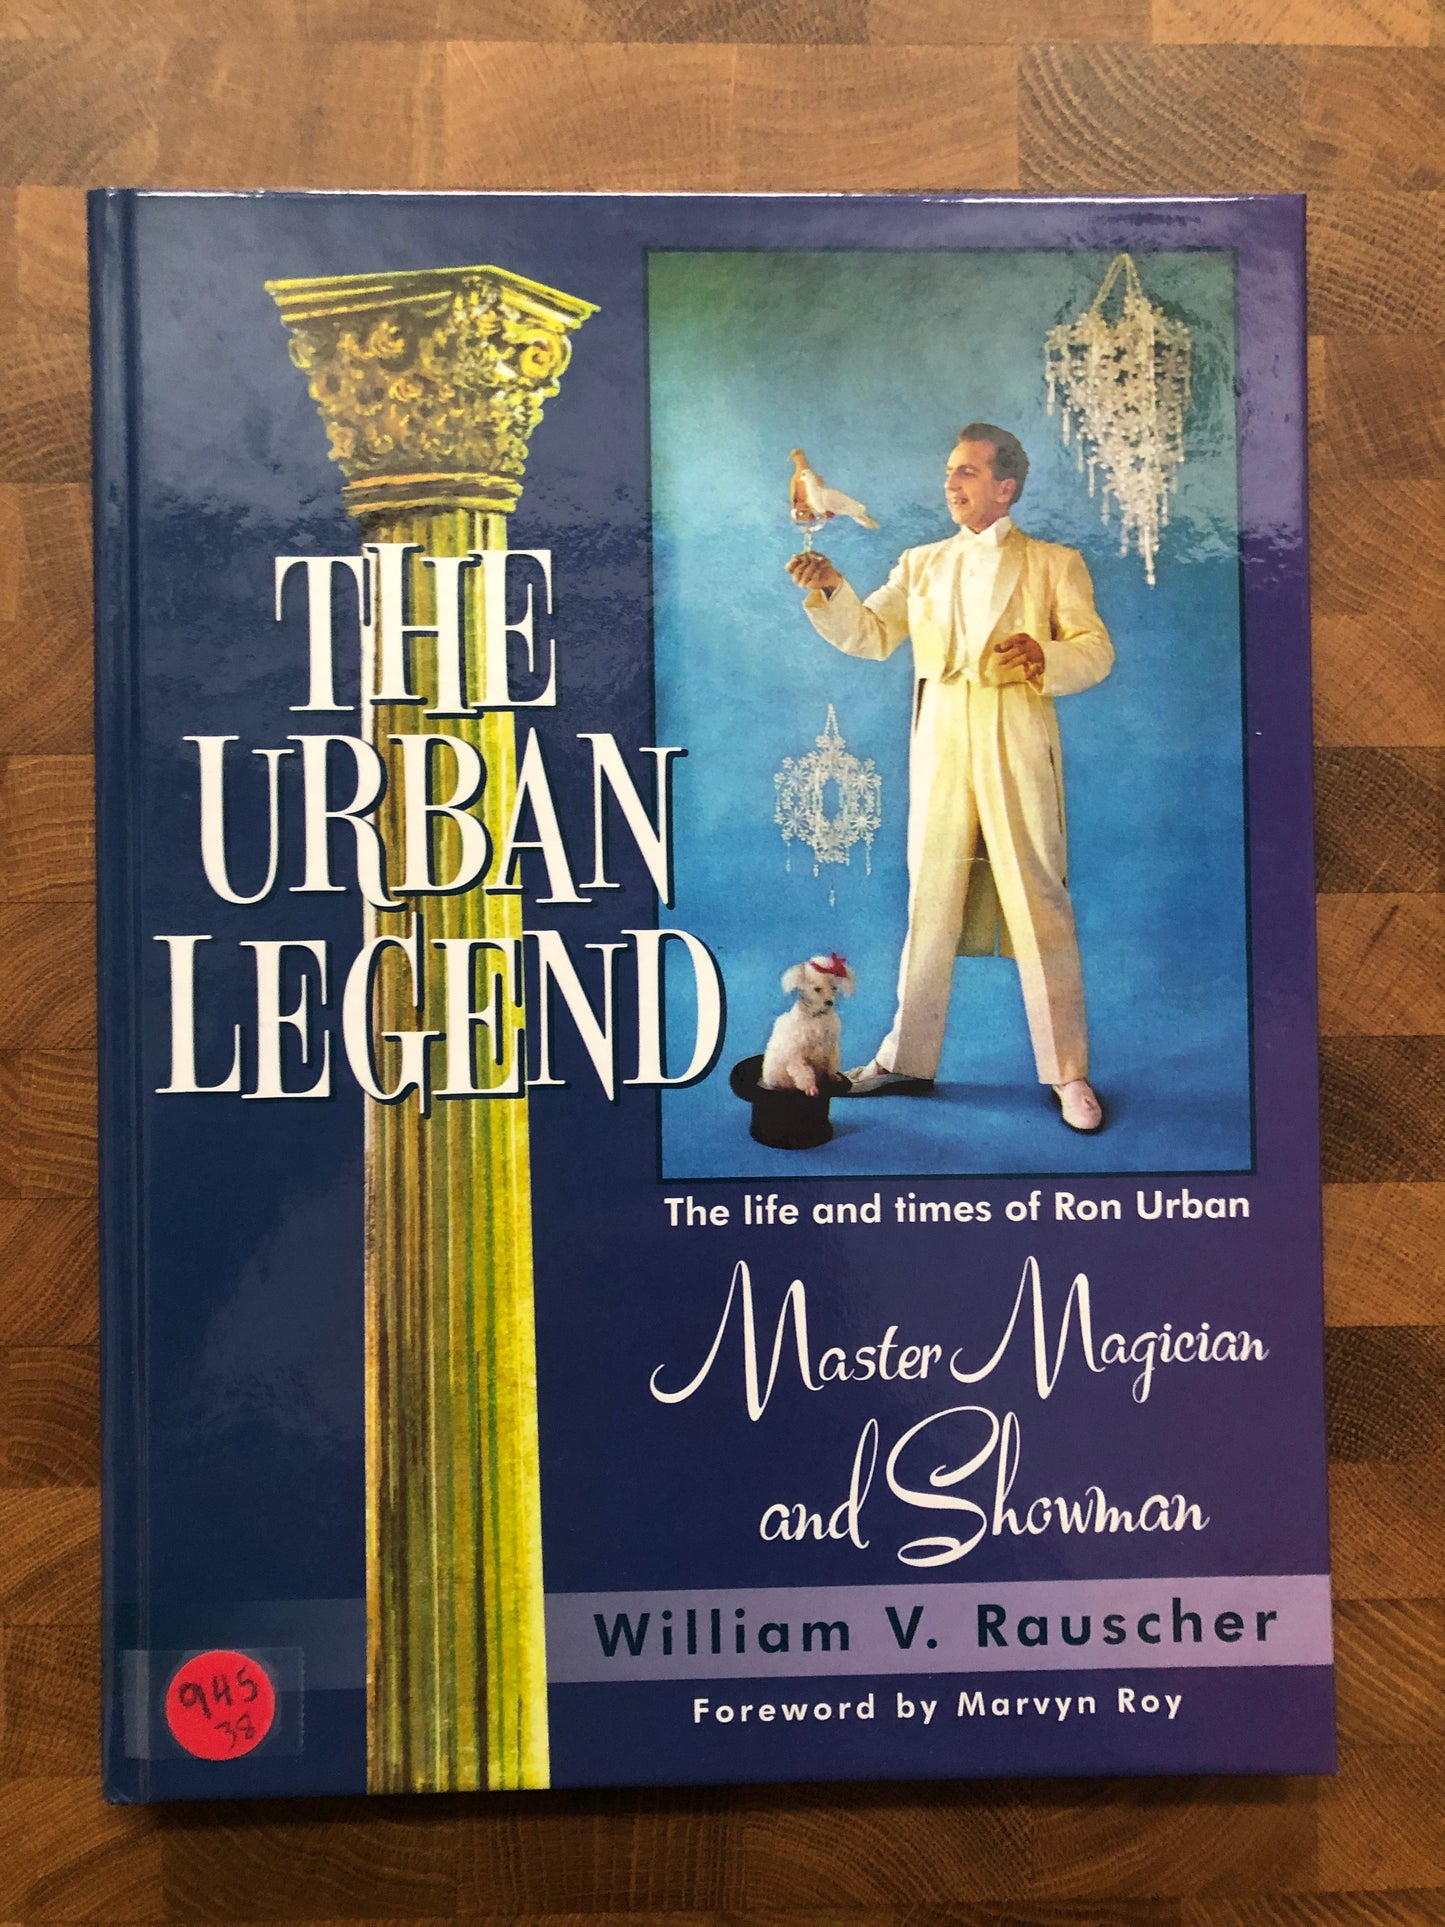 The Urban Legend: The Life & Times of Ron Urban - William V. Rauscher